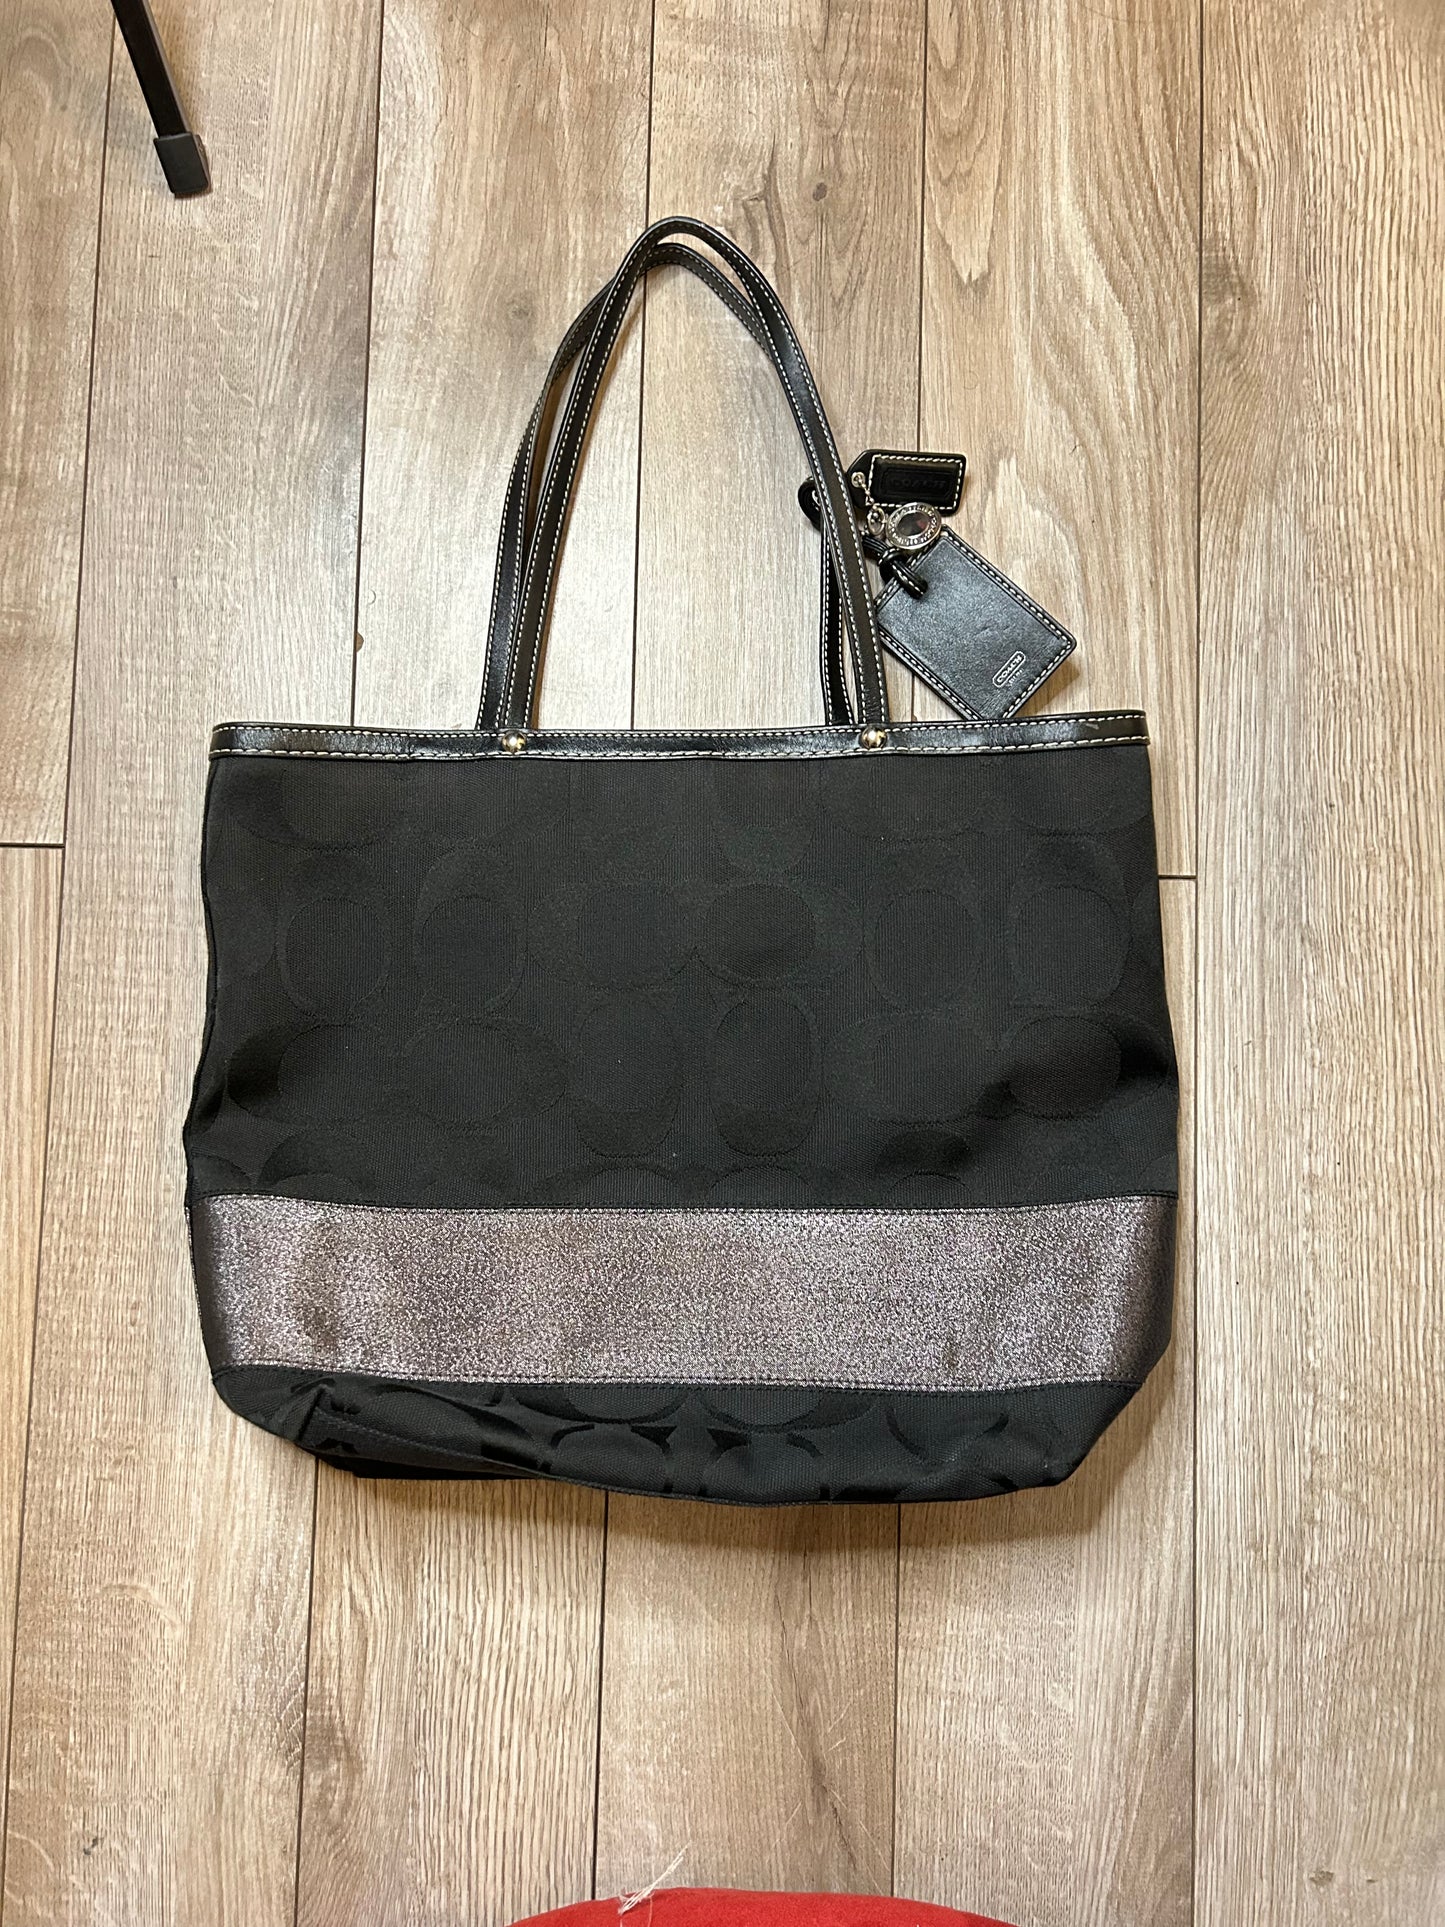 Black and Silver Large Coach Poppy Tote Bag